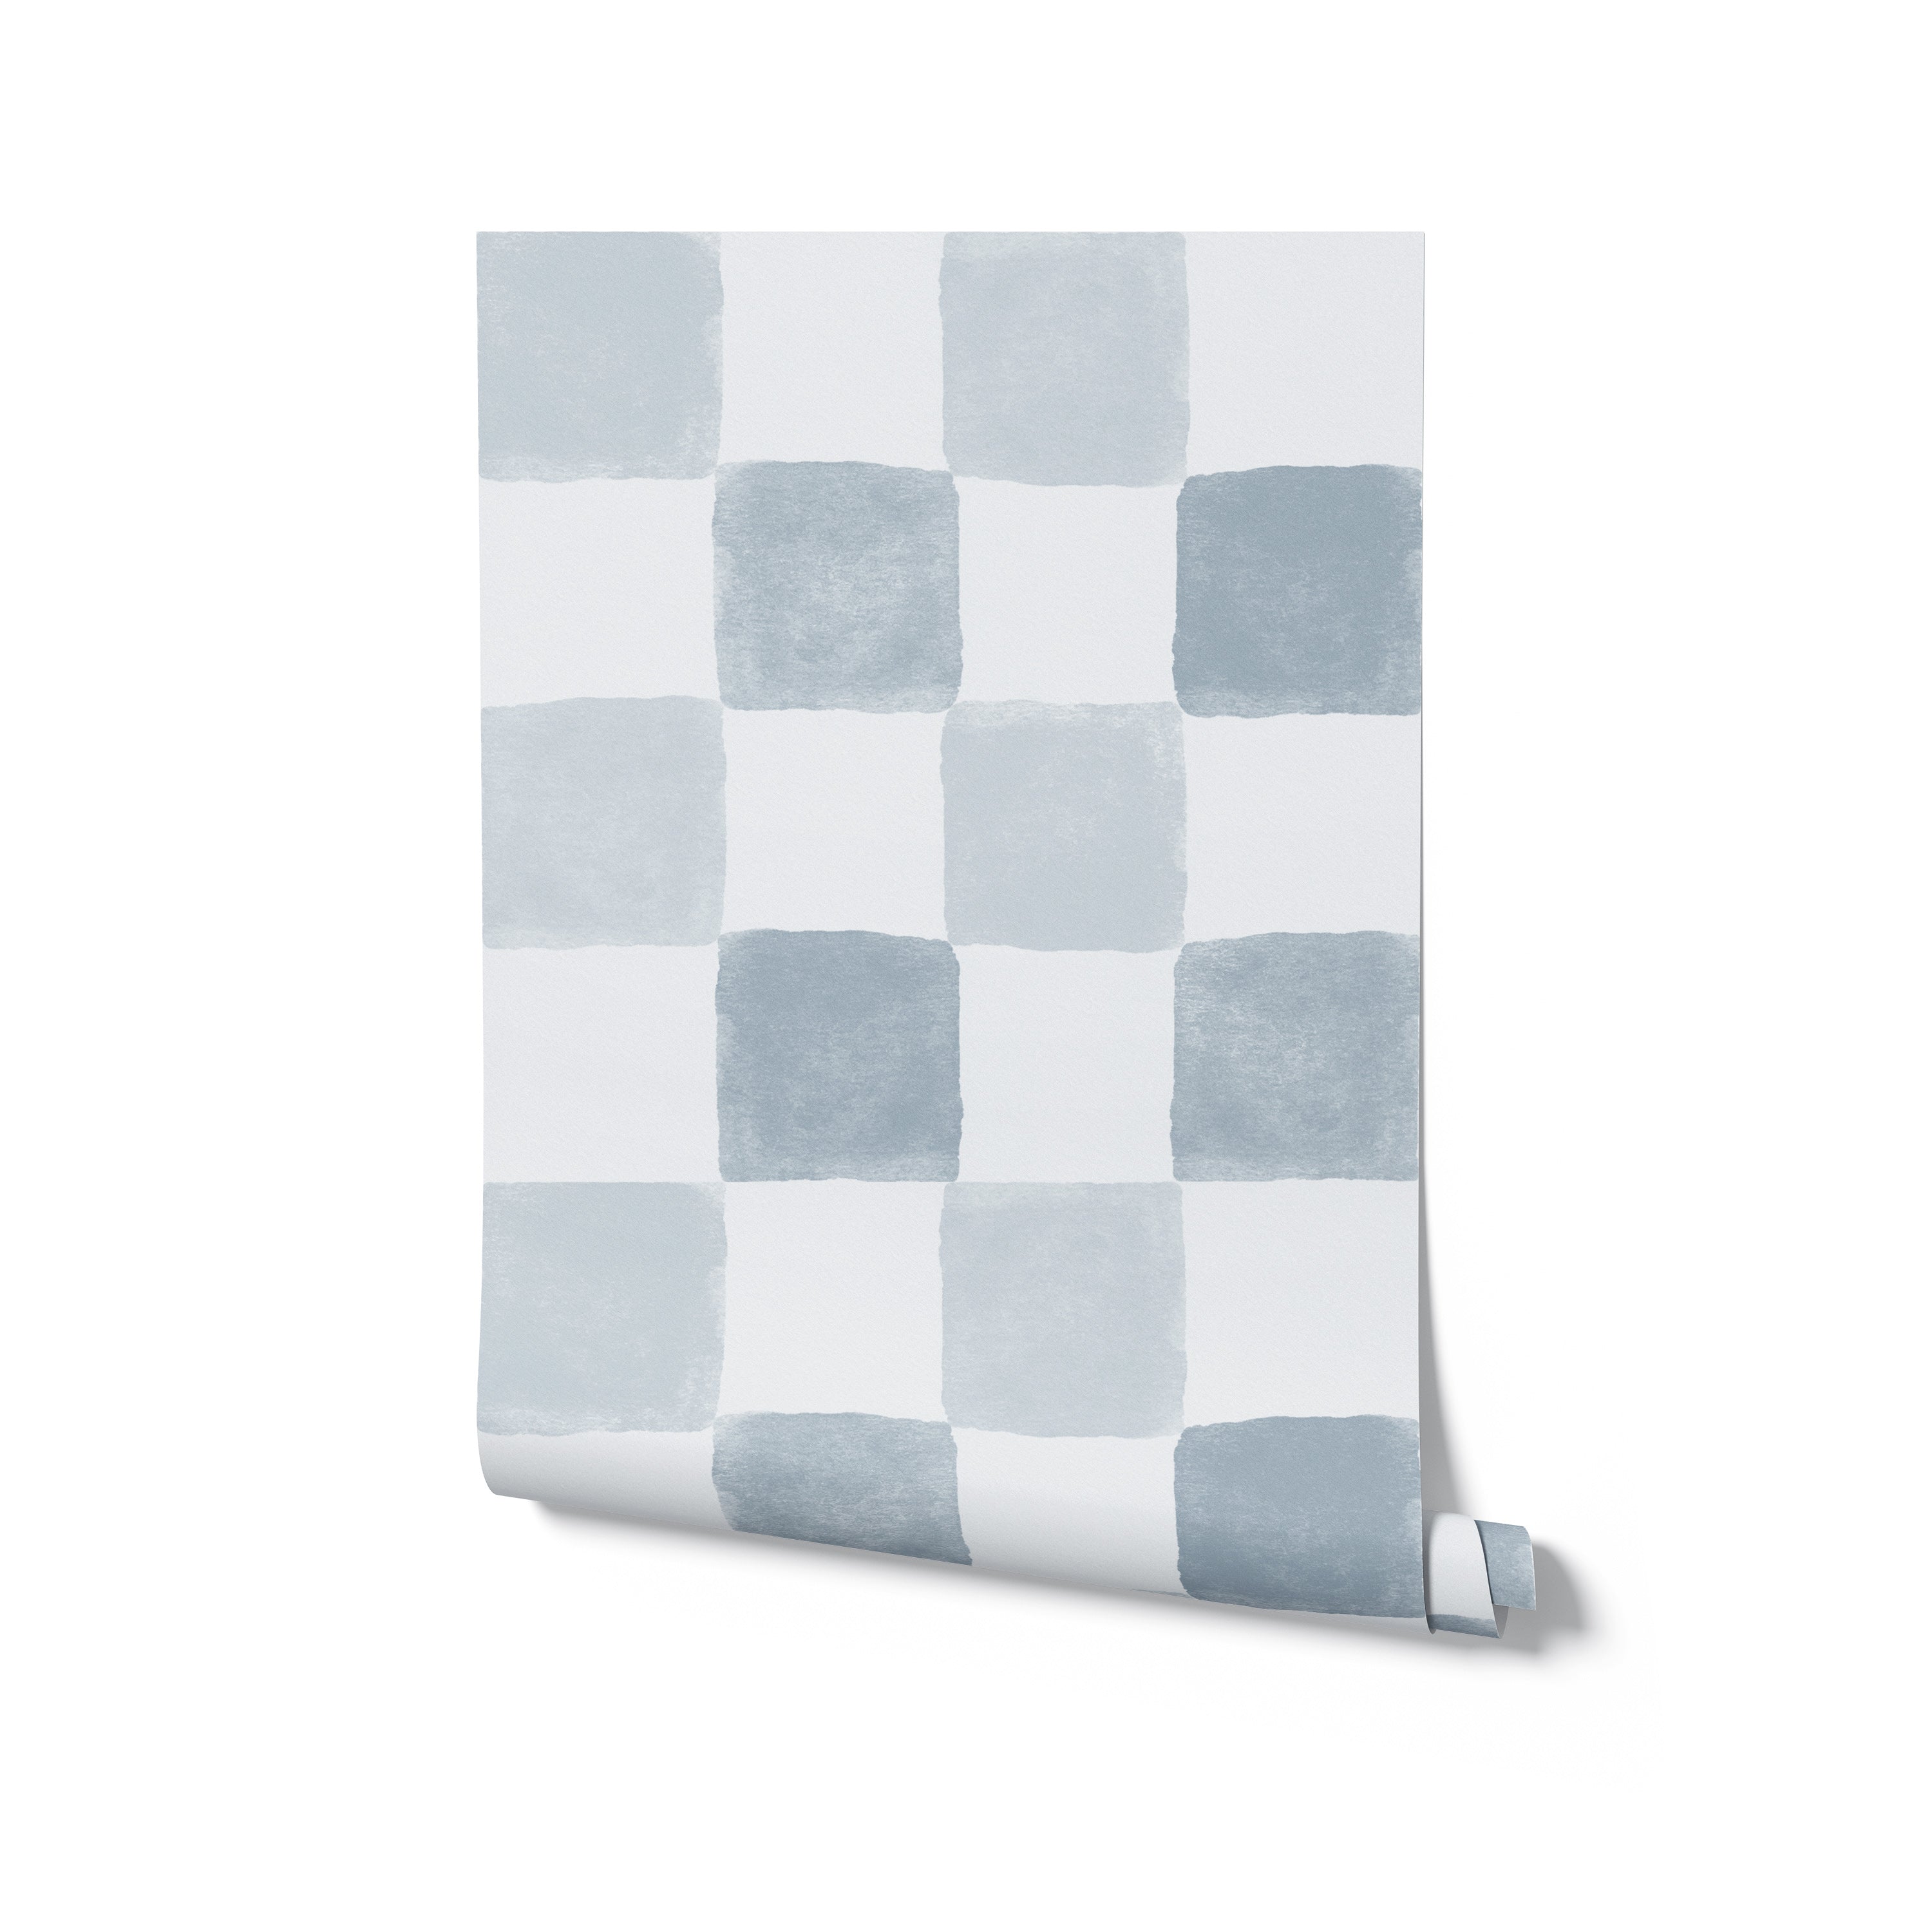 A roll of Clémence Wallpaper in Pale Blue partially unrolled to show the gentle checkered pattern of alternating pale blue and white squares, ideal for a subtle yet stylish wall accent in contemporary interiors